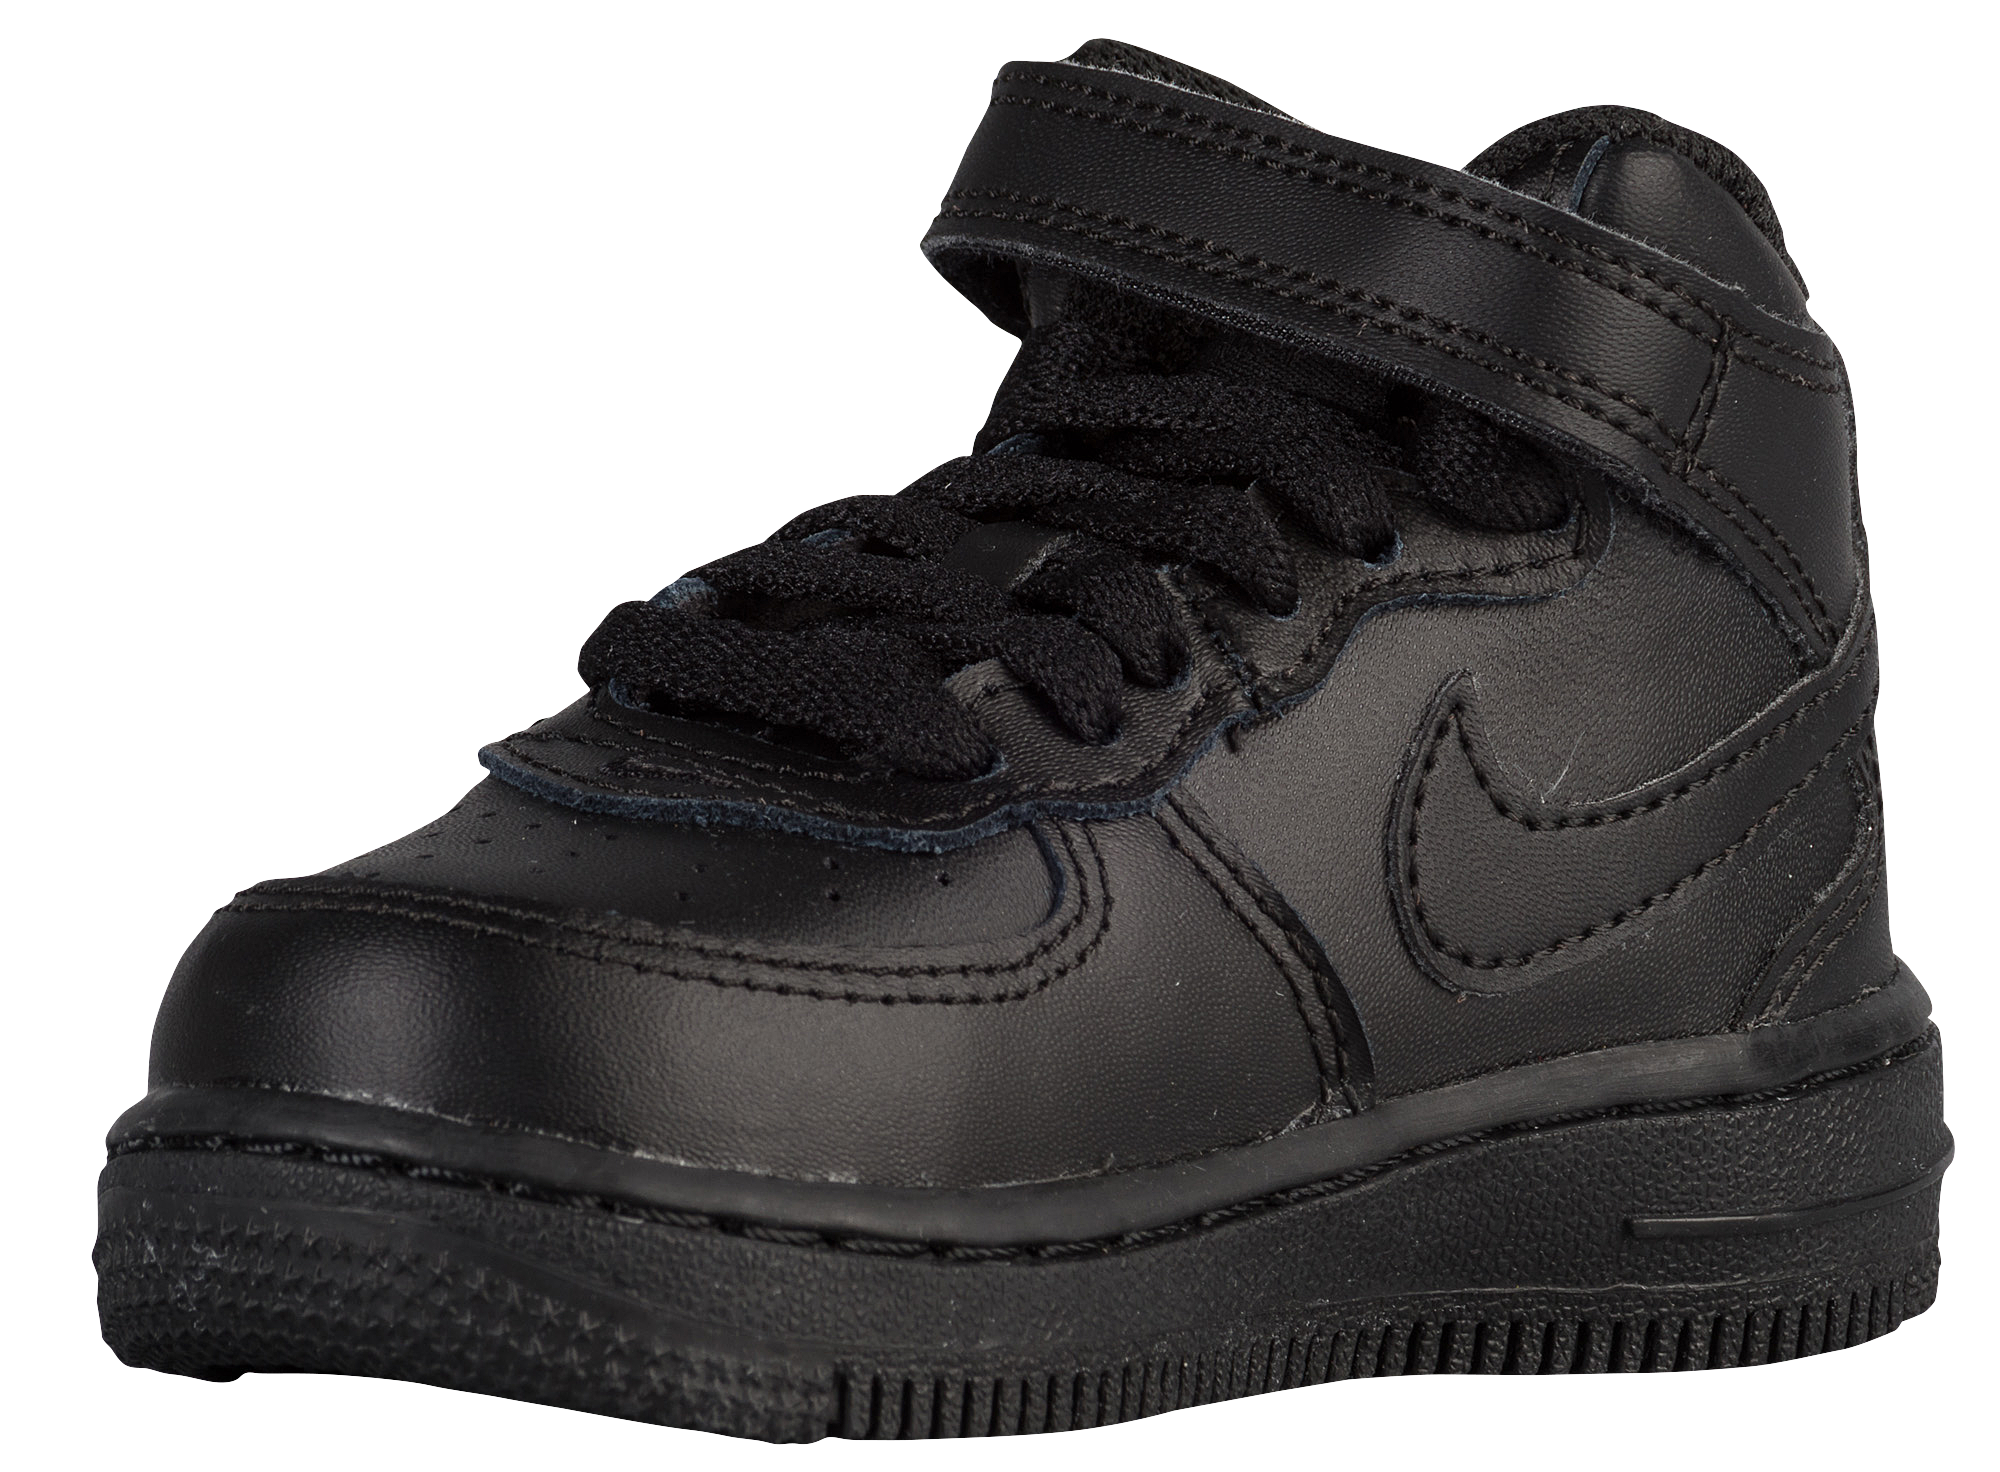 all black airforce 1s